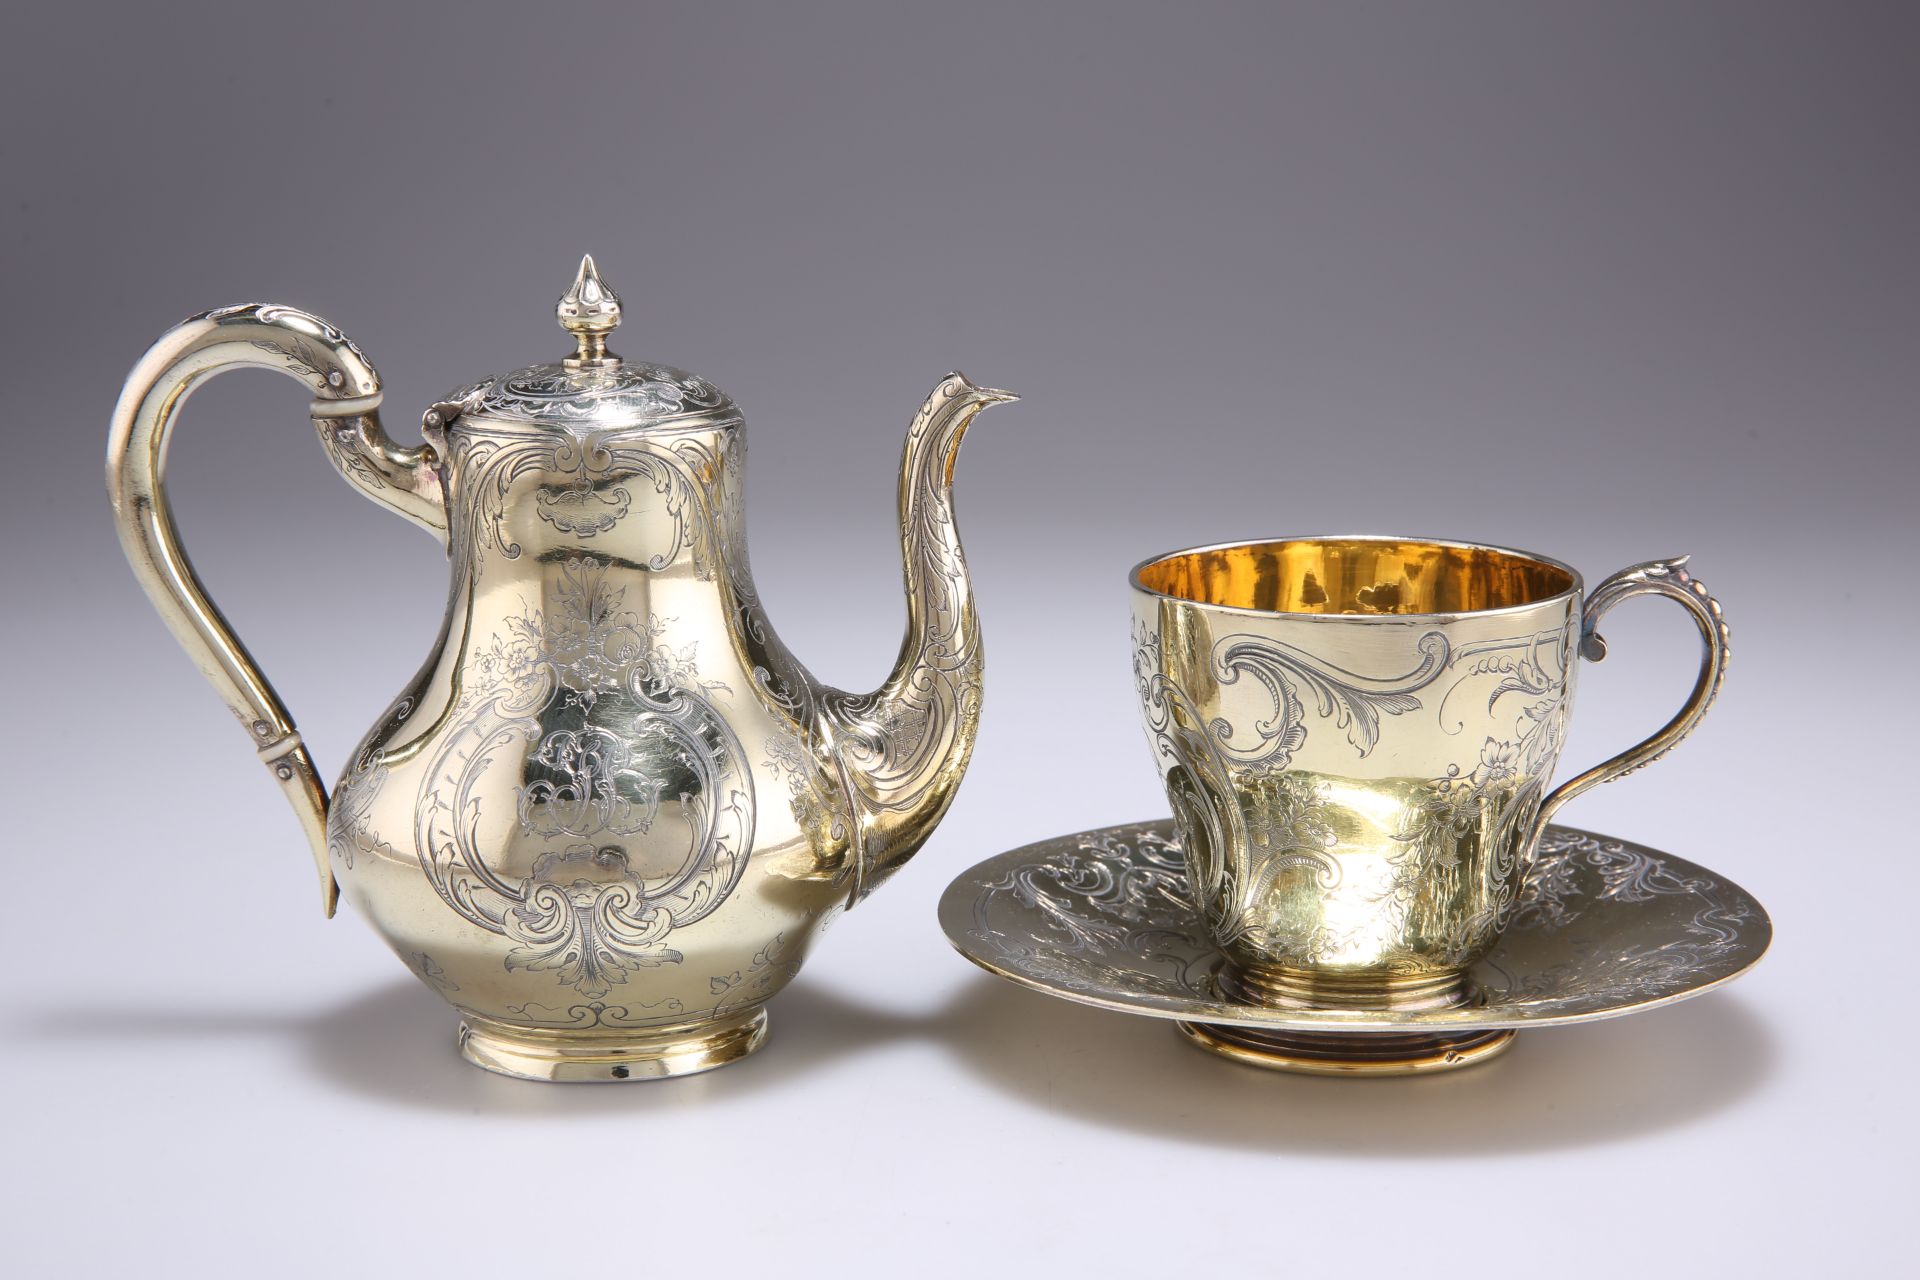 A FRENCH SILVER-GILT COFFEE POT, CUP AND SAUCER, MID 19TH CENTURY